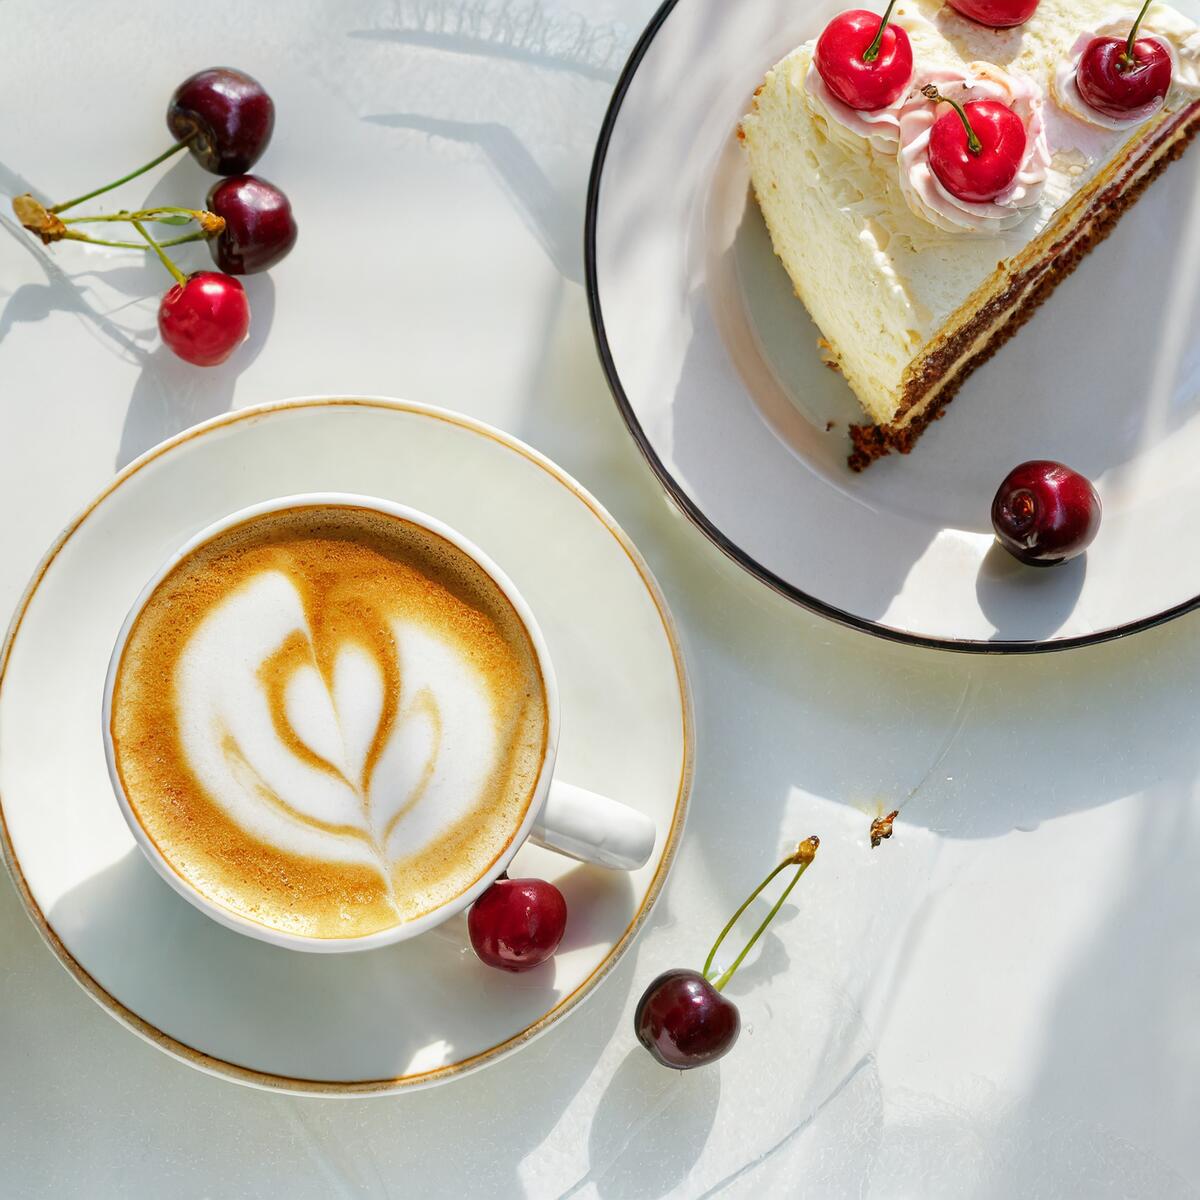 A white cup of cappuccino coffee next to a plate with a slice of cake on it